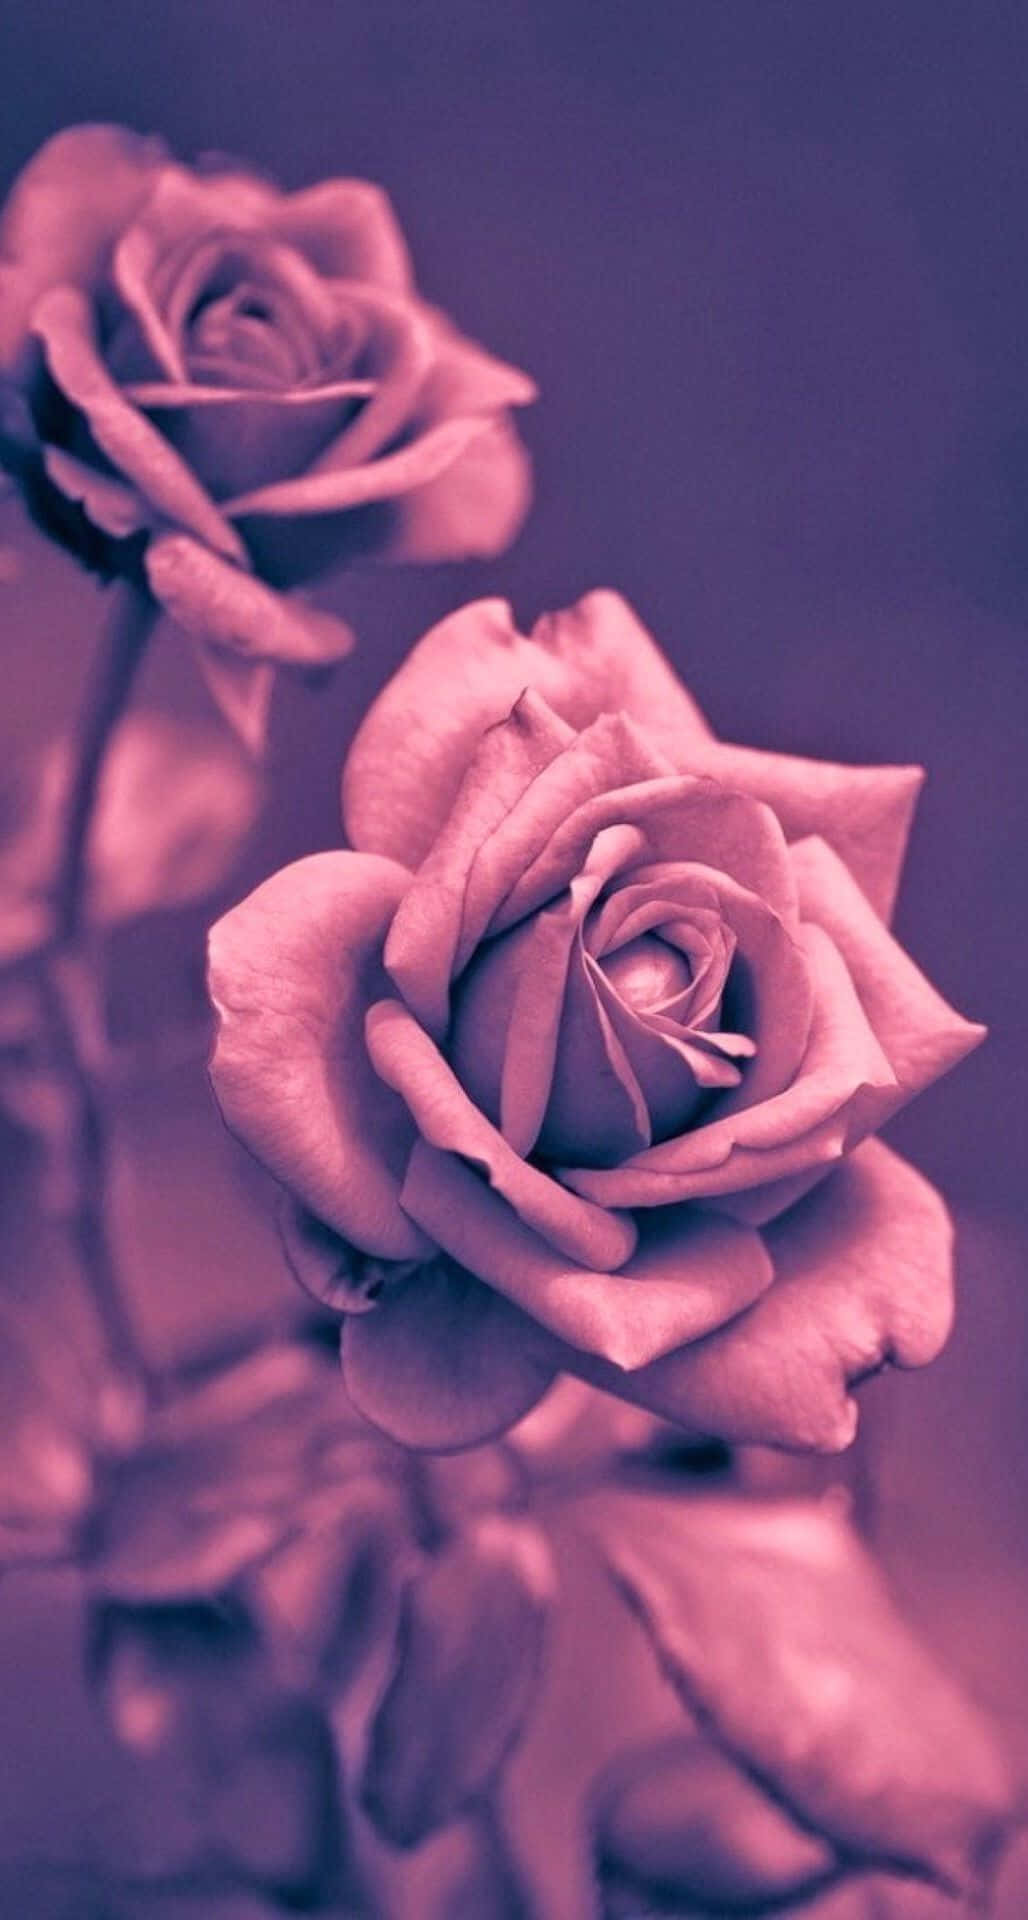 Enjoy the beauty of a delicate, Cute Rose. Wallpaper